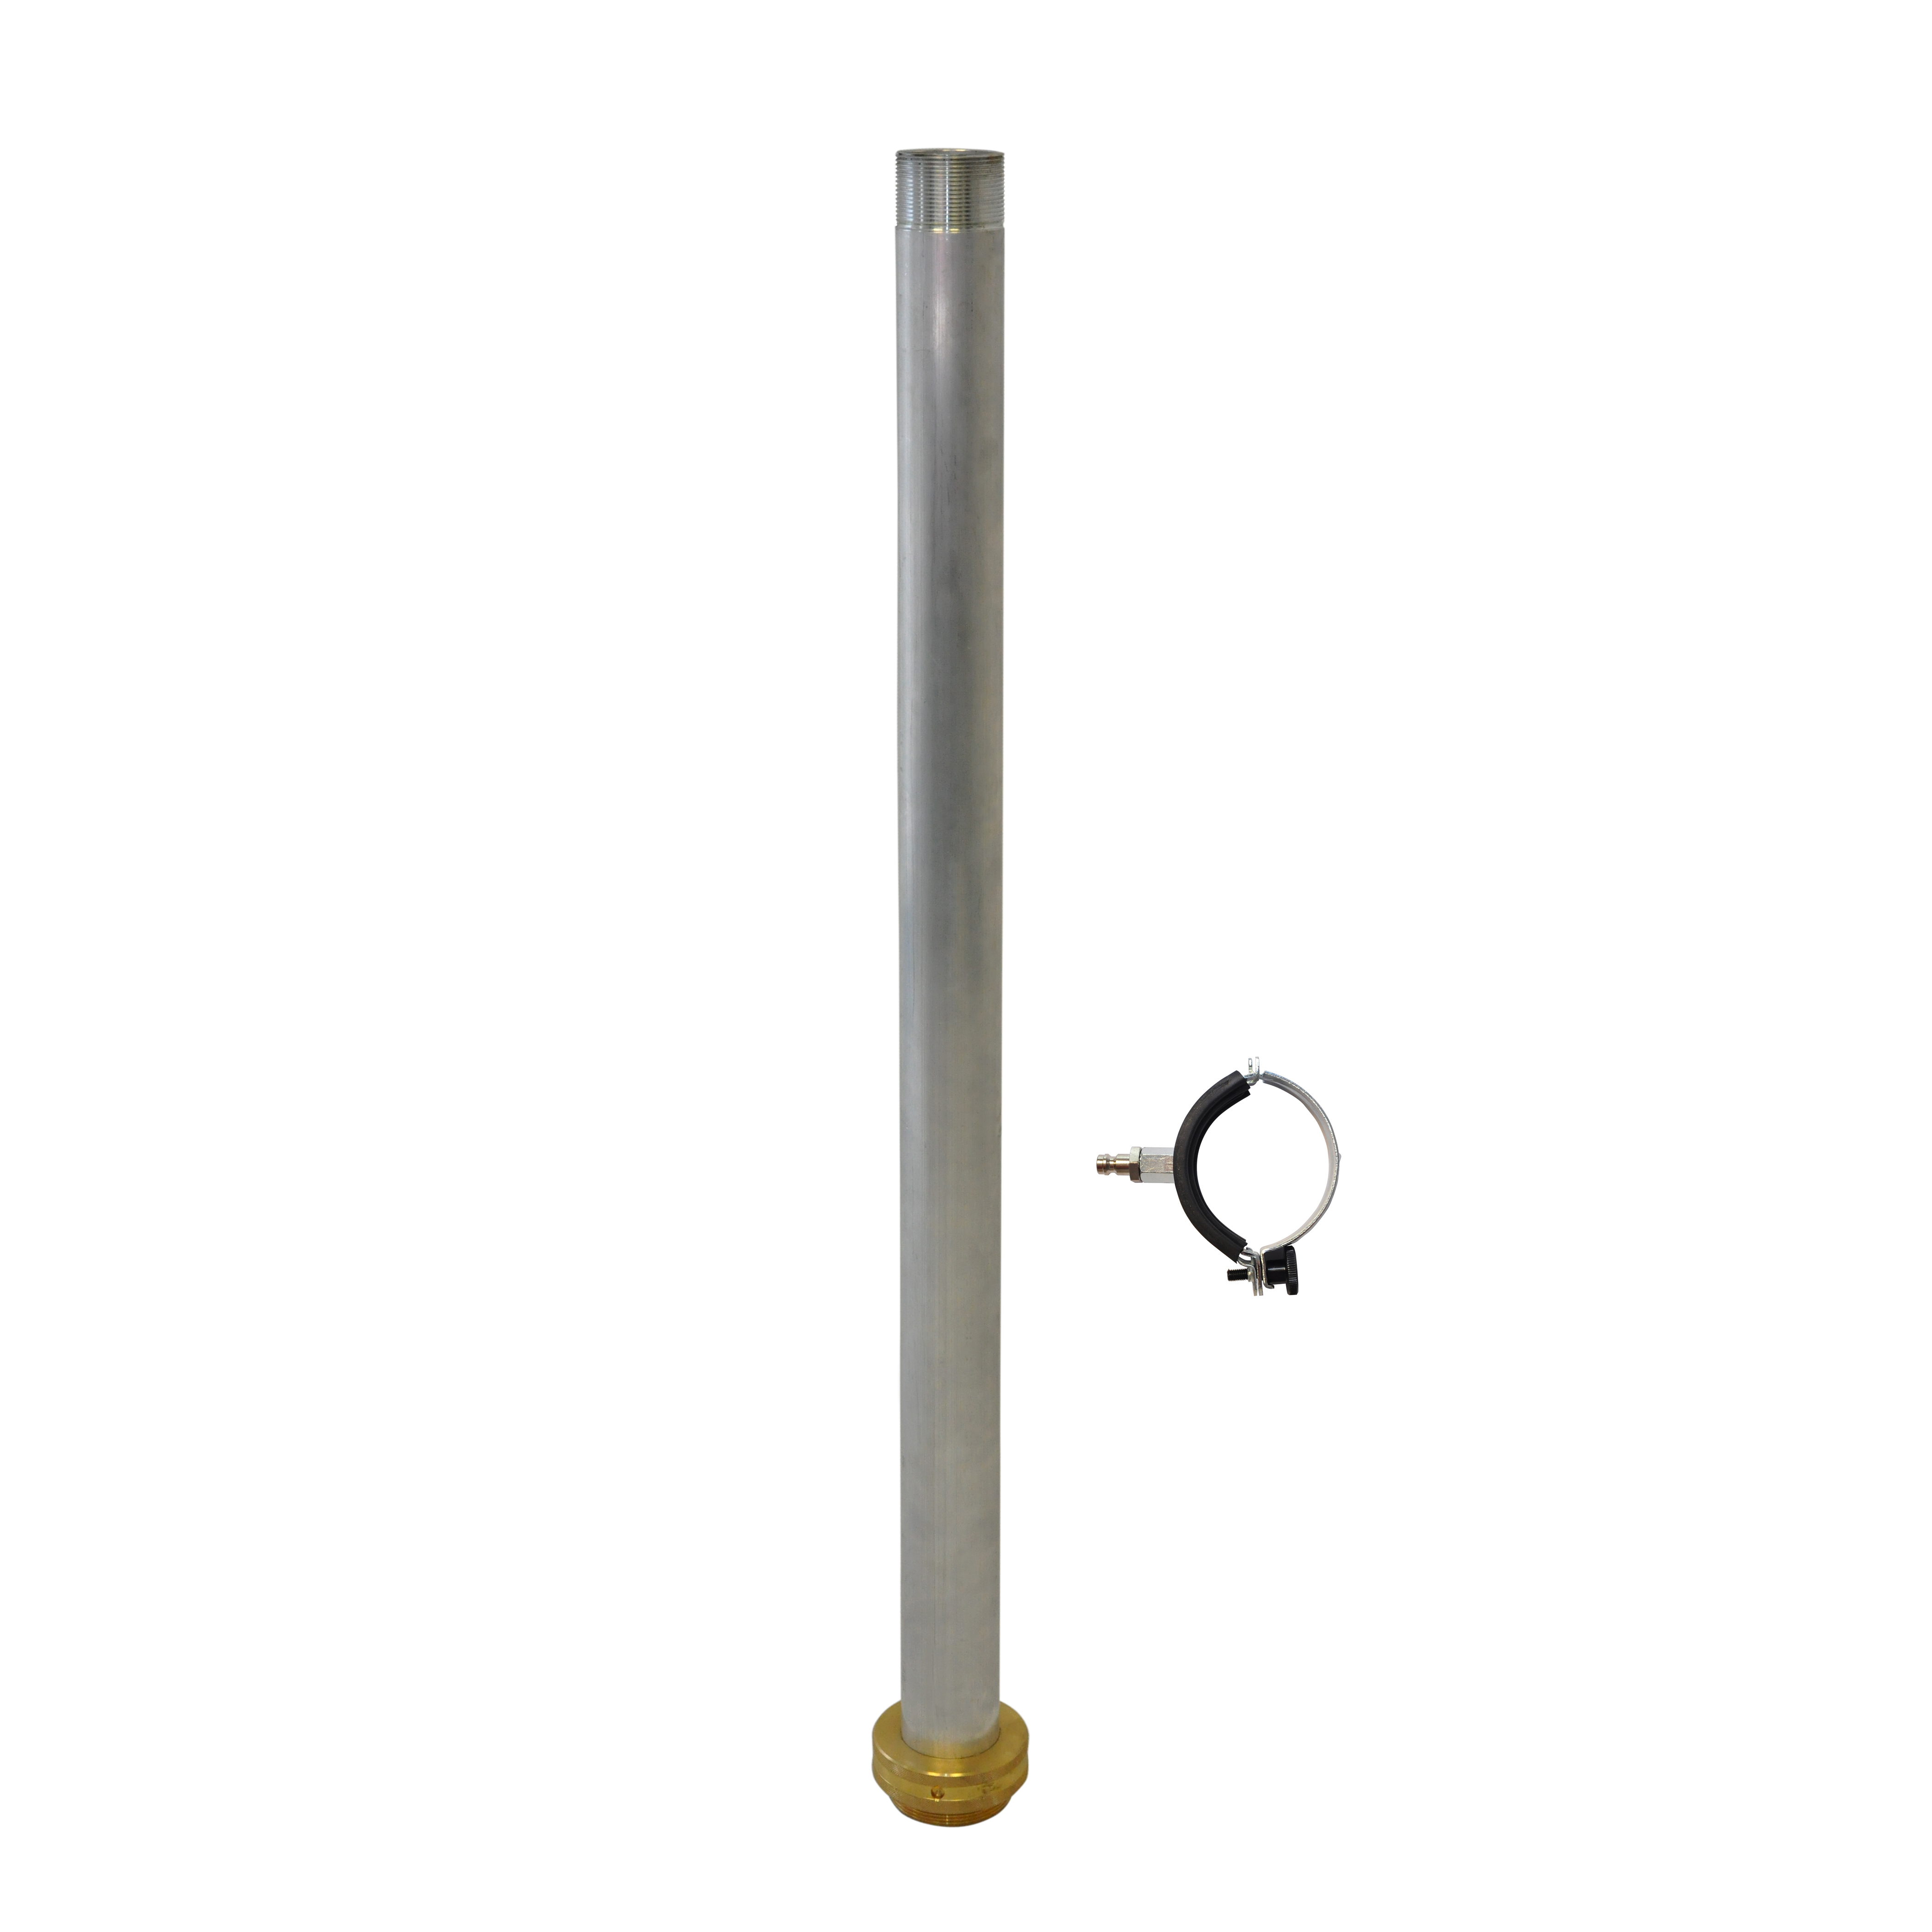 Blow-off pipe 2" for gas standpipe